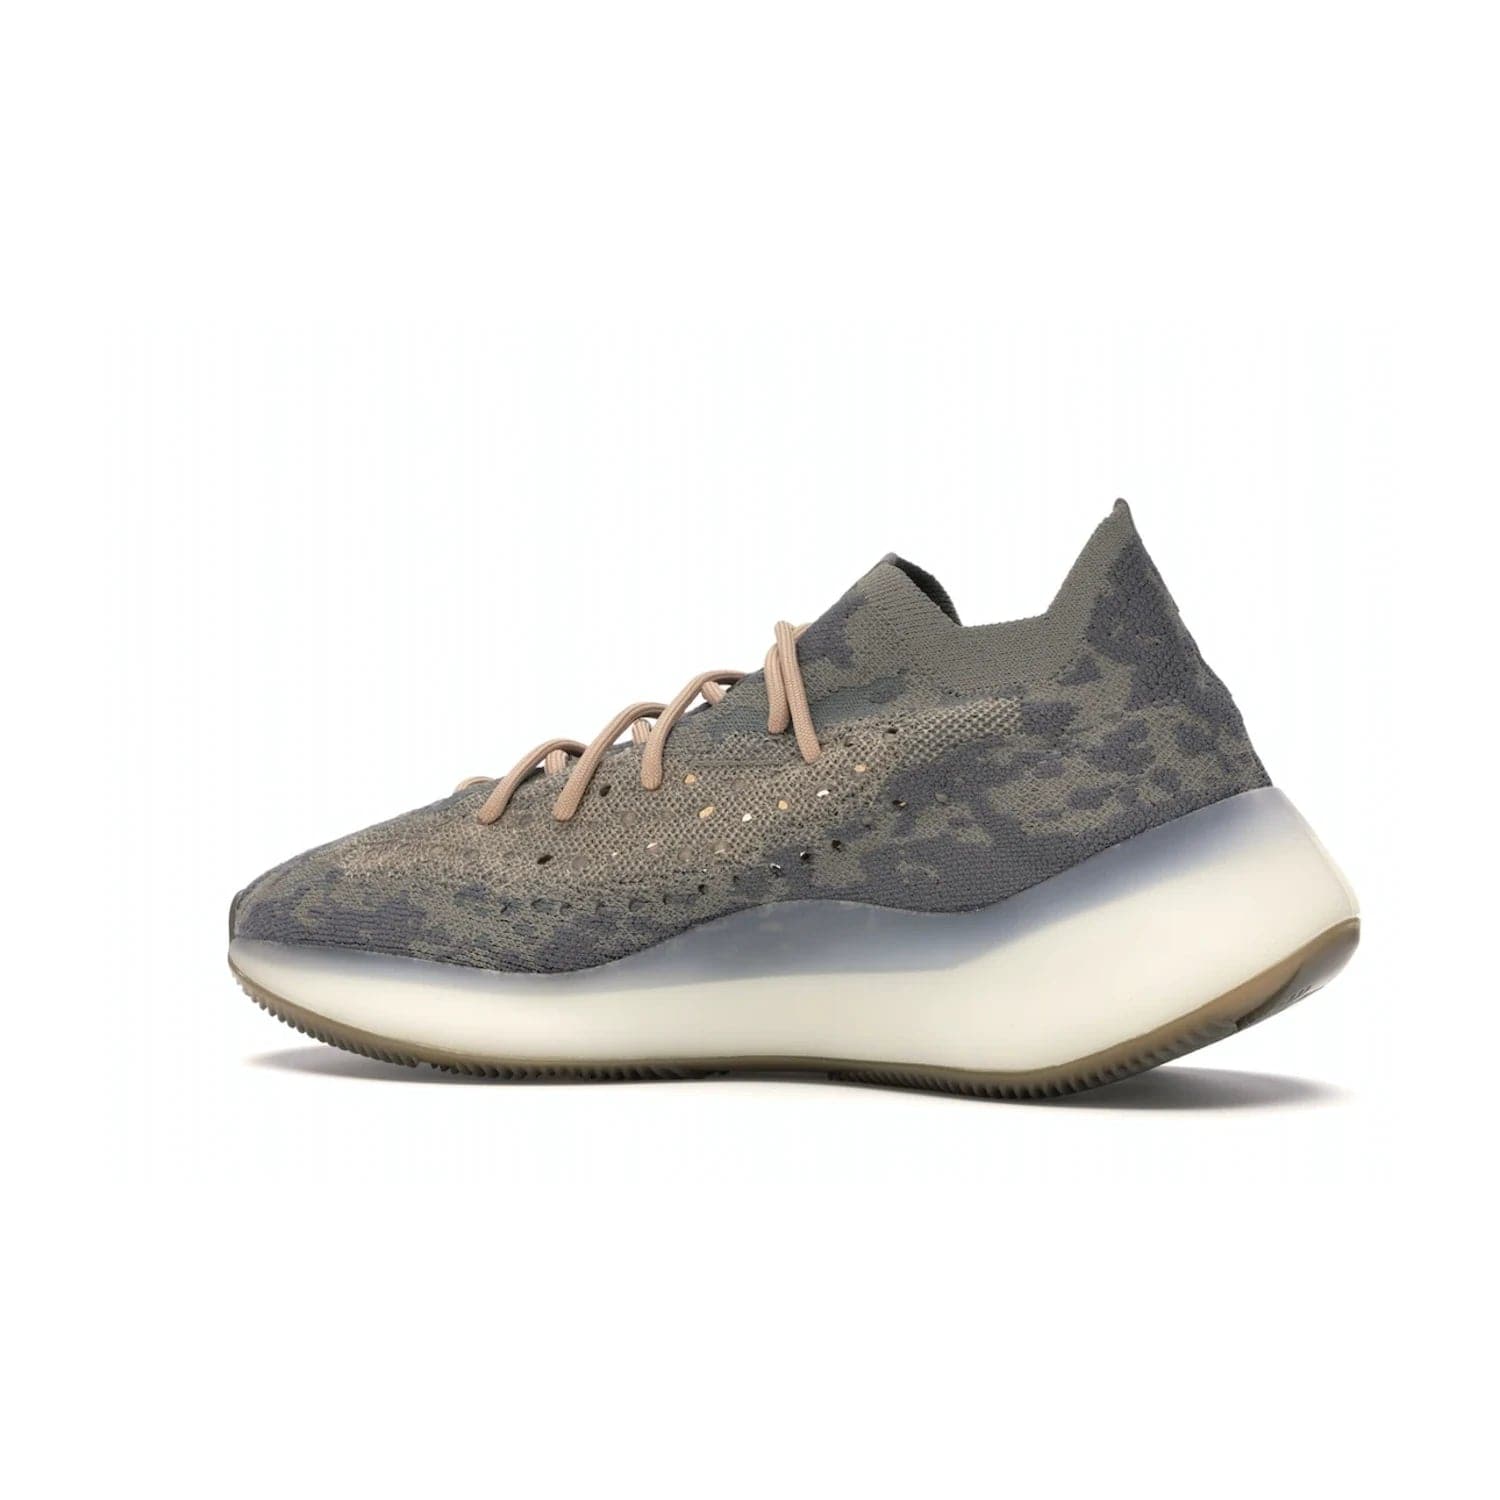 adidas Yeezy Boost 380 Mist Reflective - Image 21 - Only at www.BallersClubKickz.com - Shop adidas Yeezy Boost 380 Mist Reflective for comfort and style. Enjoy unique reflective upper, upgraded translucent Boost midsole, and engineered gum outsole grip. The Mist/Mist/Mist colorway released in February of 2020 is perfect for everyday wear.